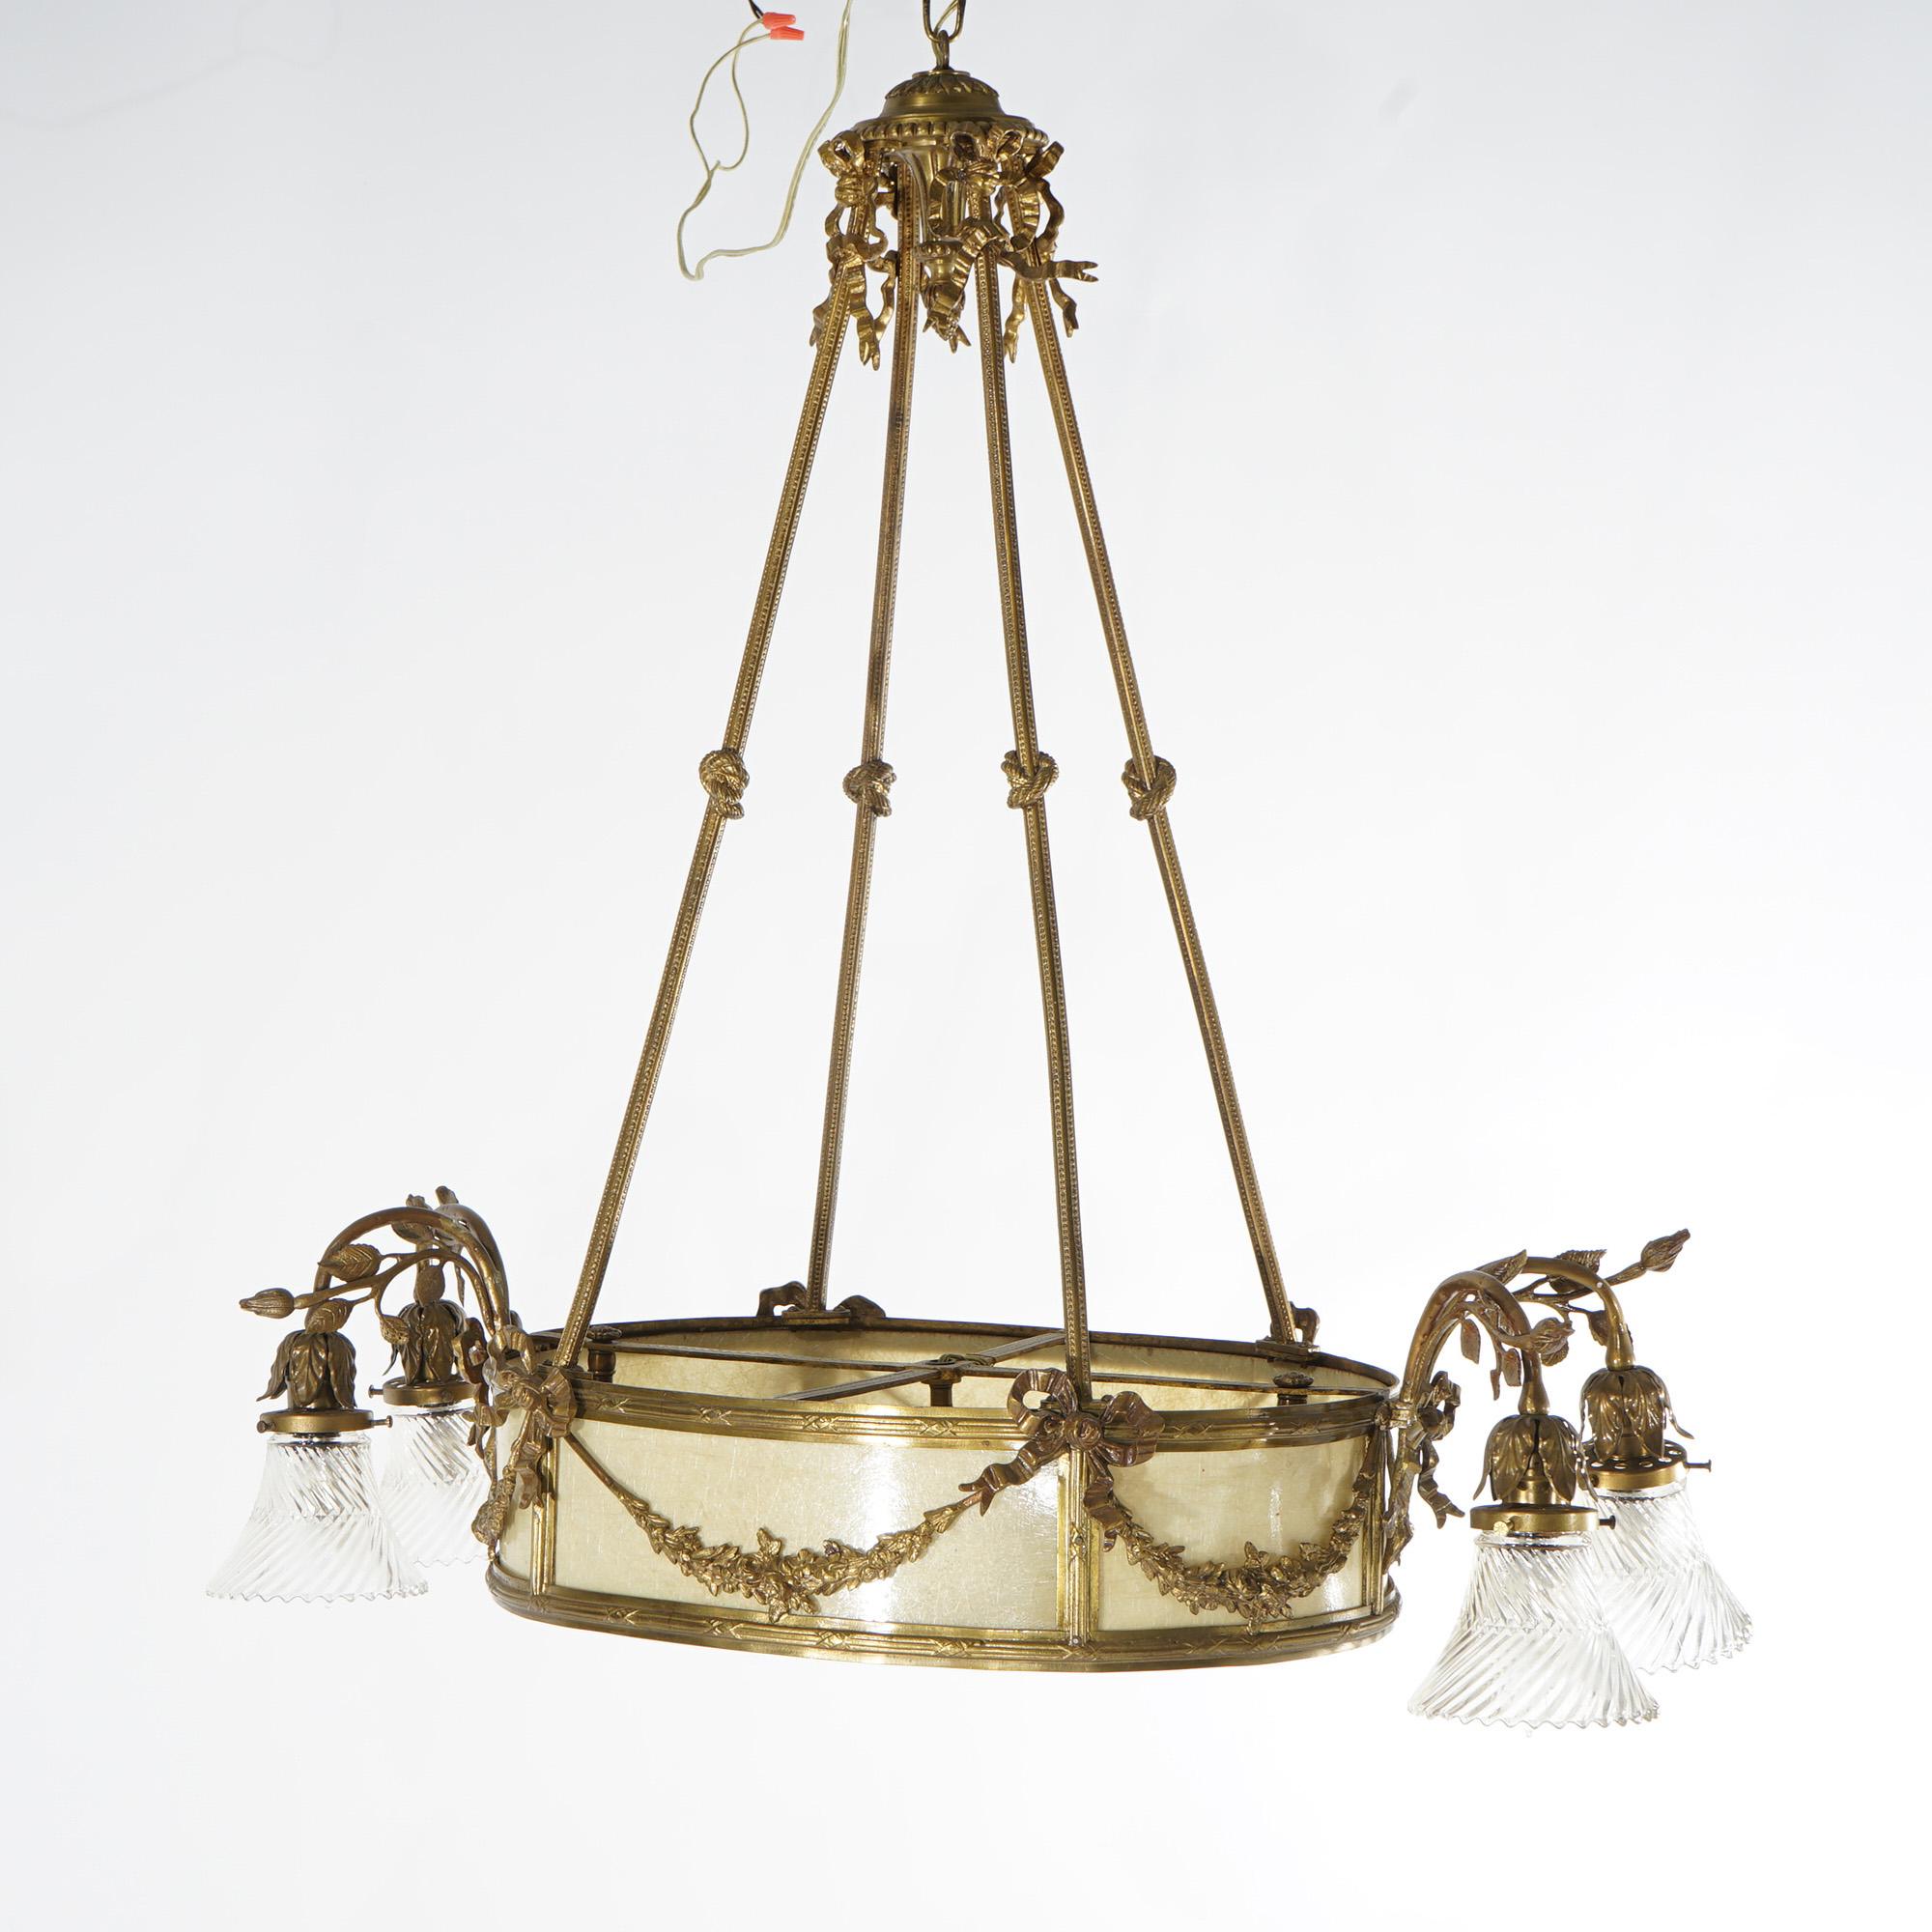 An antique French Louis XV style six-light chandelier offers gilt bronze frame with knotted rope form drops, mica insert with two interior lights, four scroll form arms terminating in lights with glass shades, and foliate elements throughout,